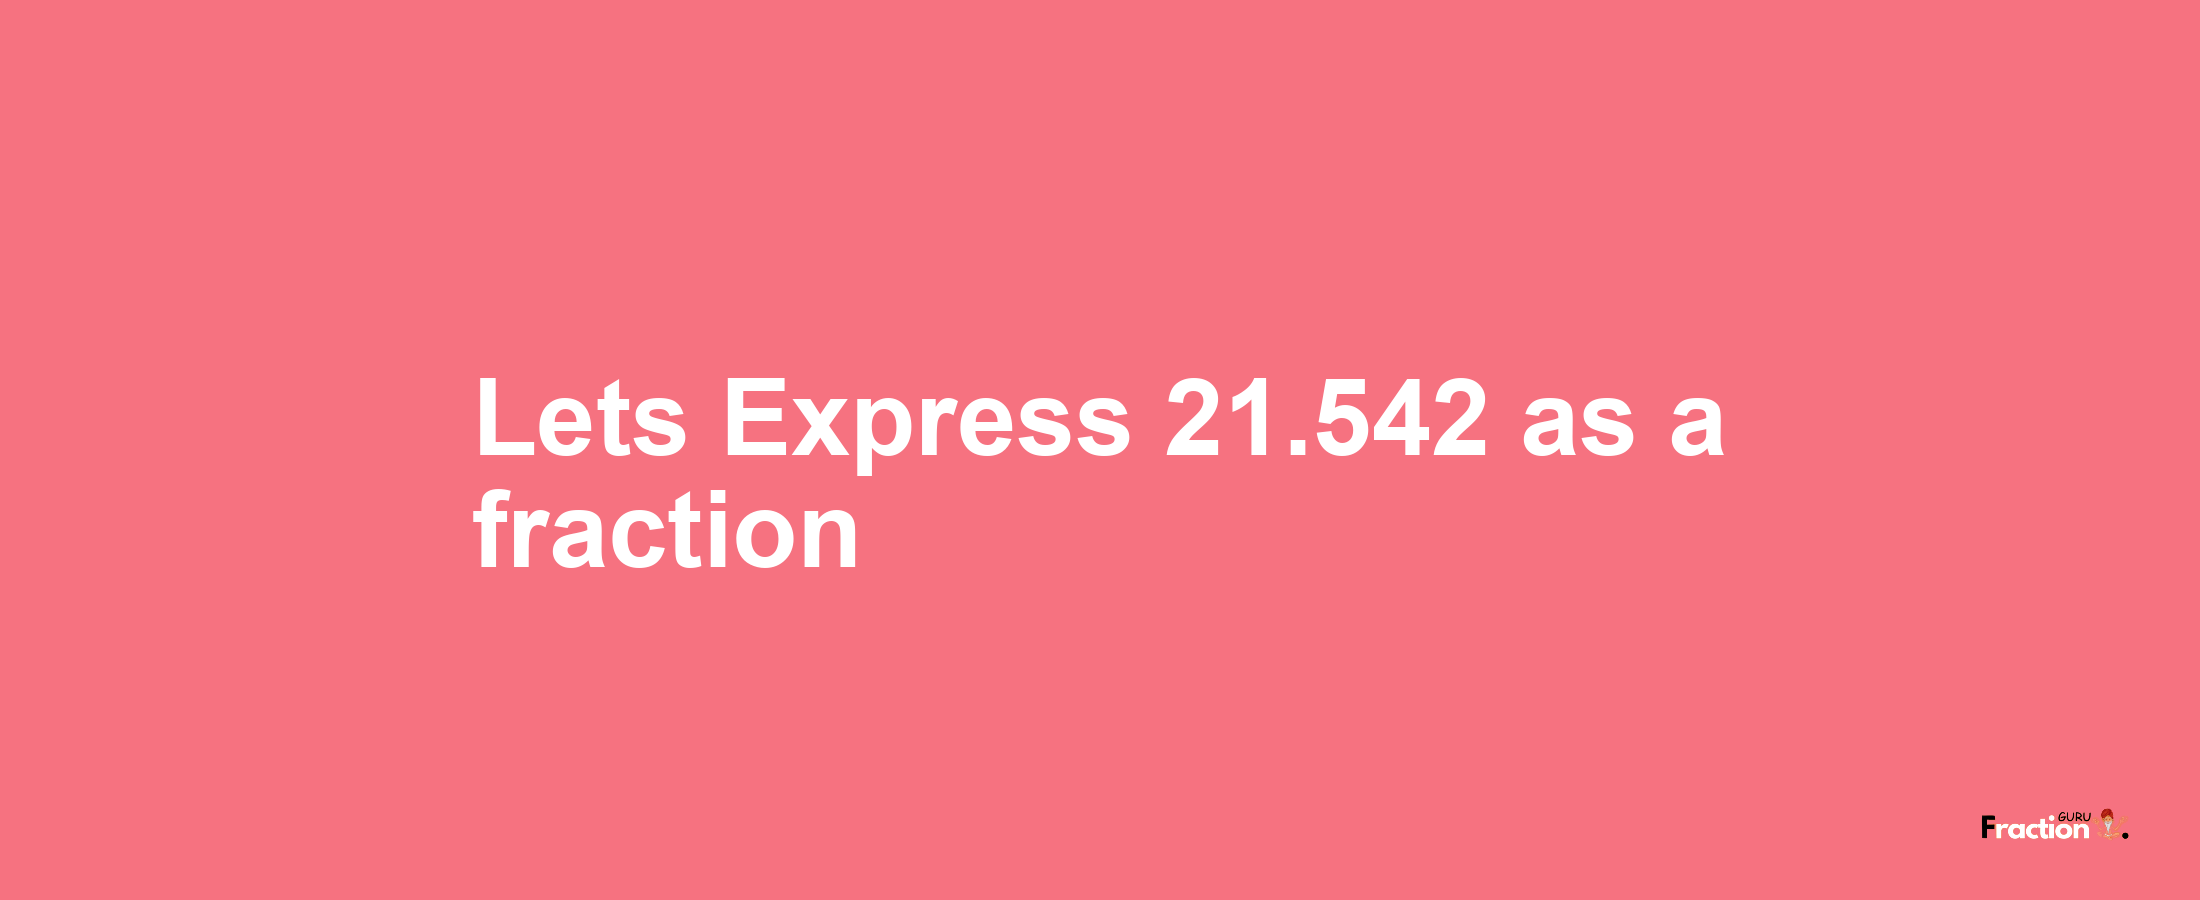 Lets Express 21.542 as afraction